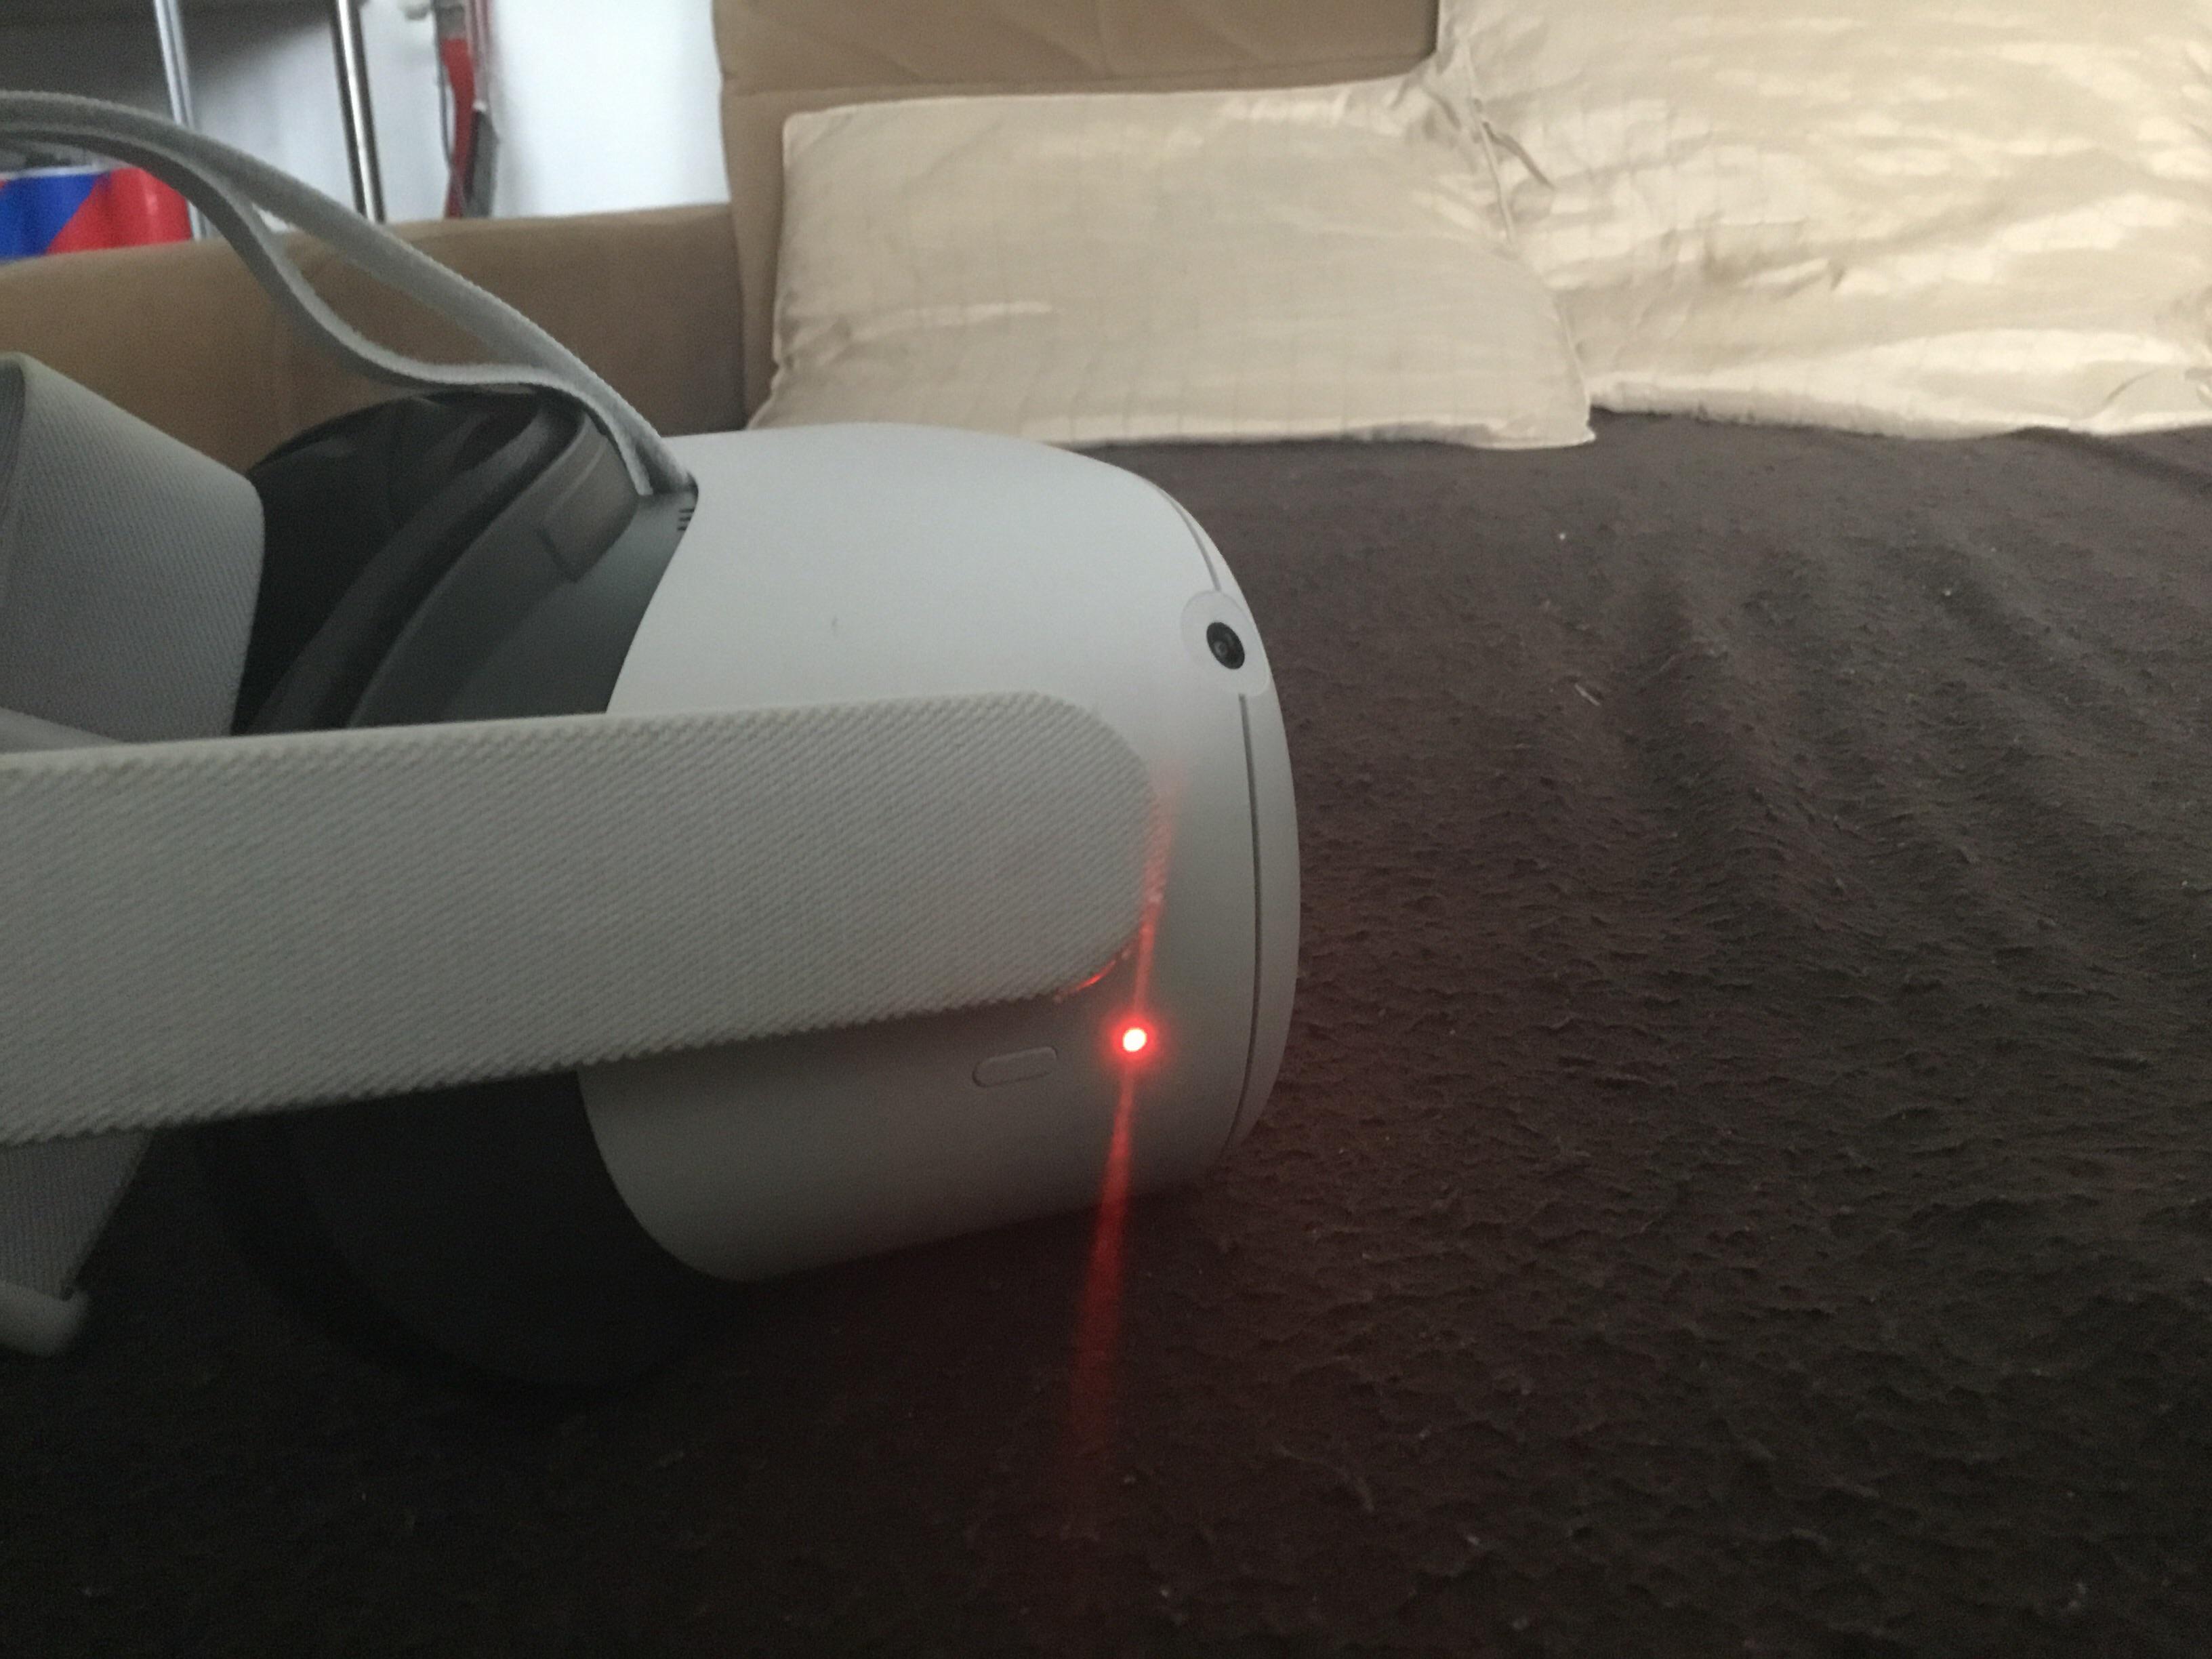 How to Fix the Red LED Issue on Quest 2 Charging? 7